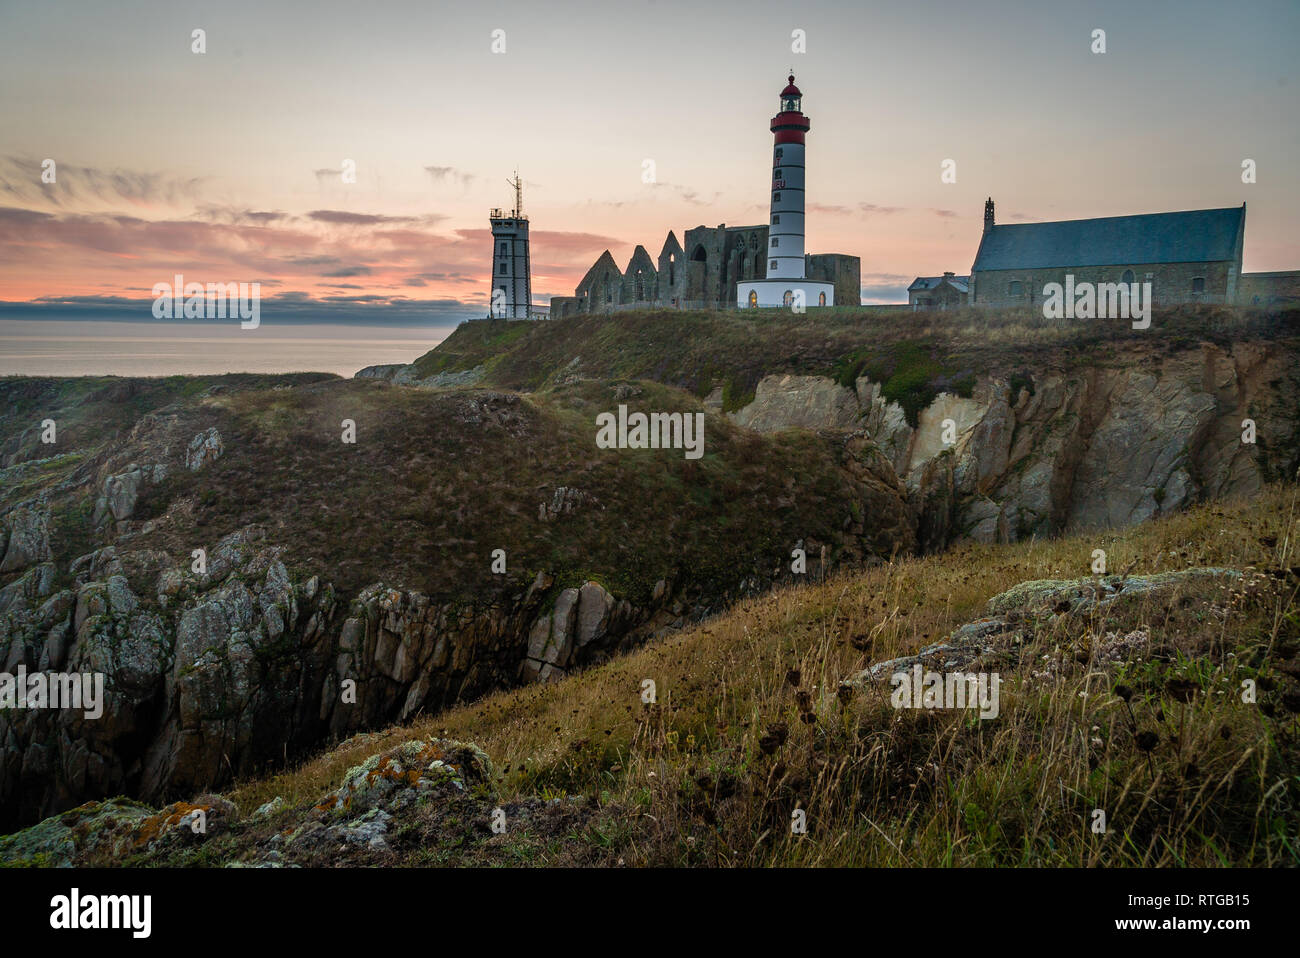 Saint Mathieu lighthouse in Brittany at sunset in France Stock Photo